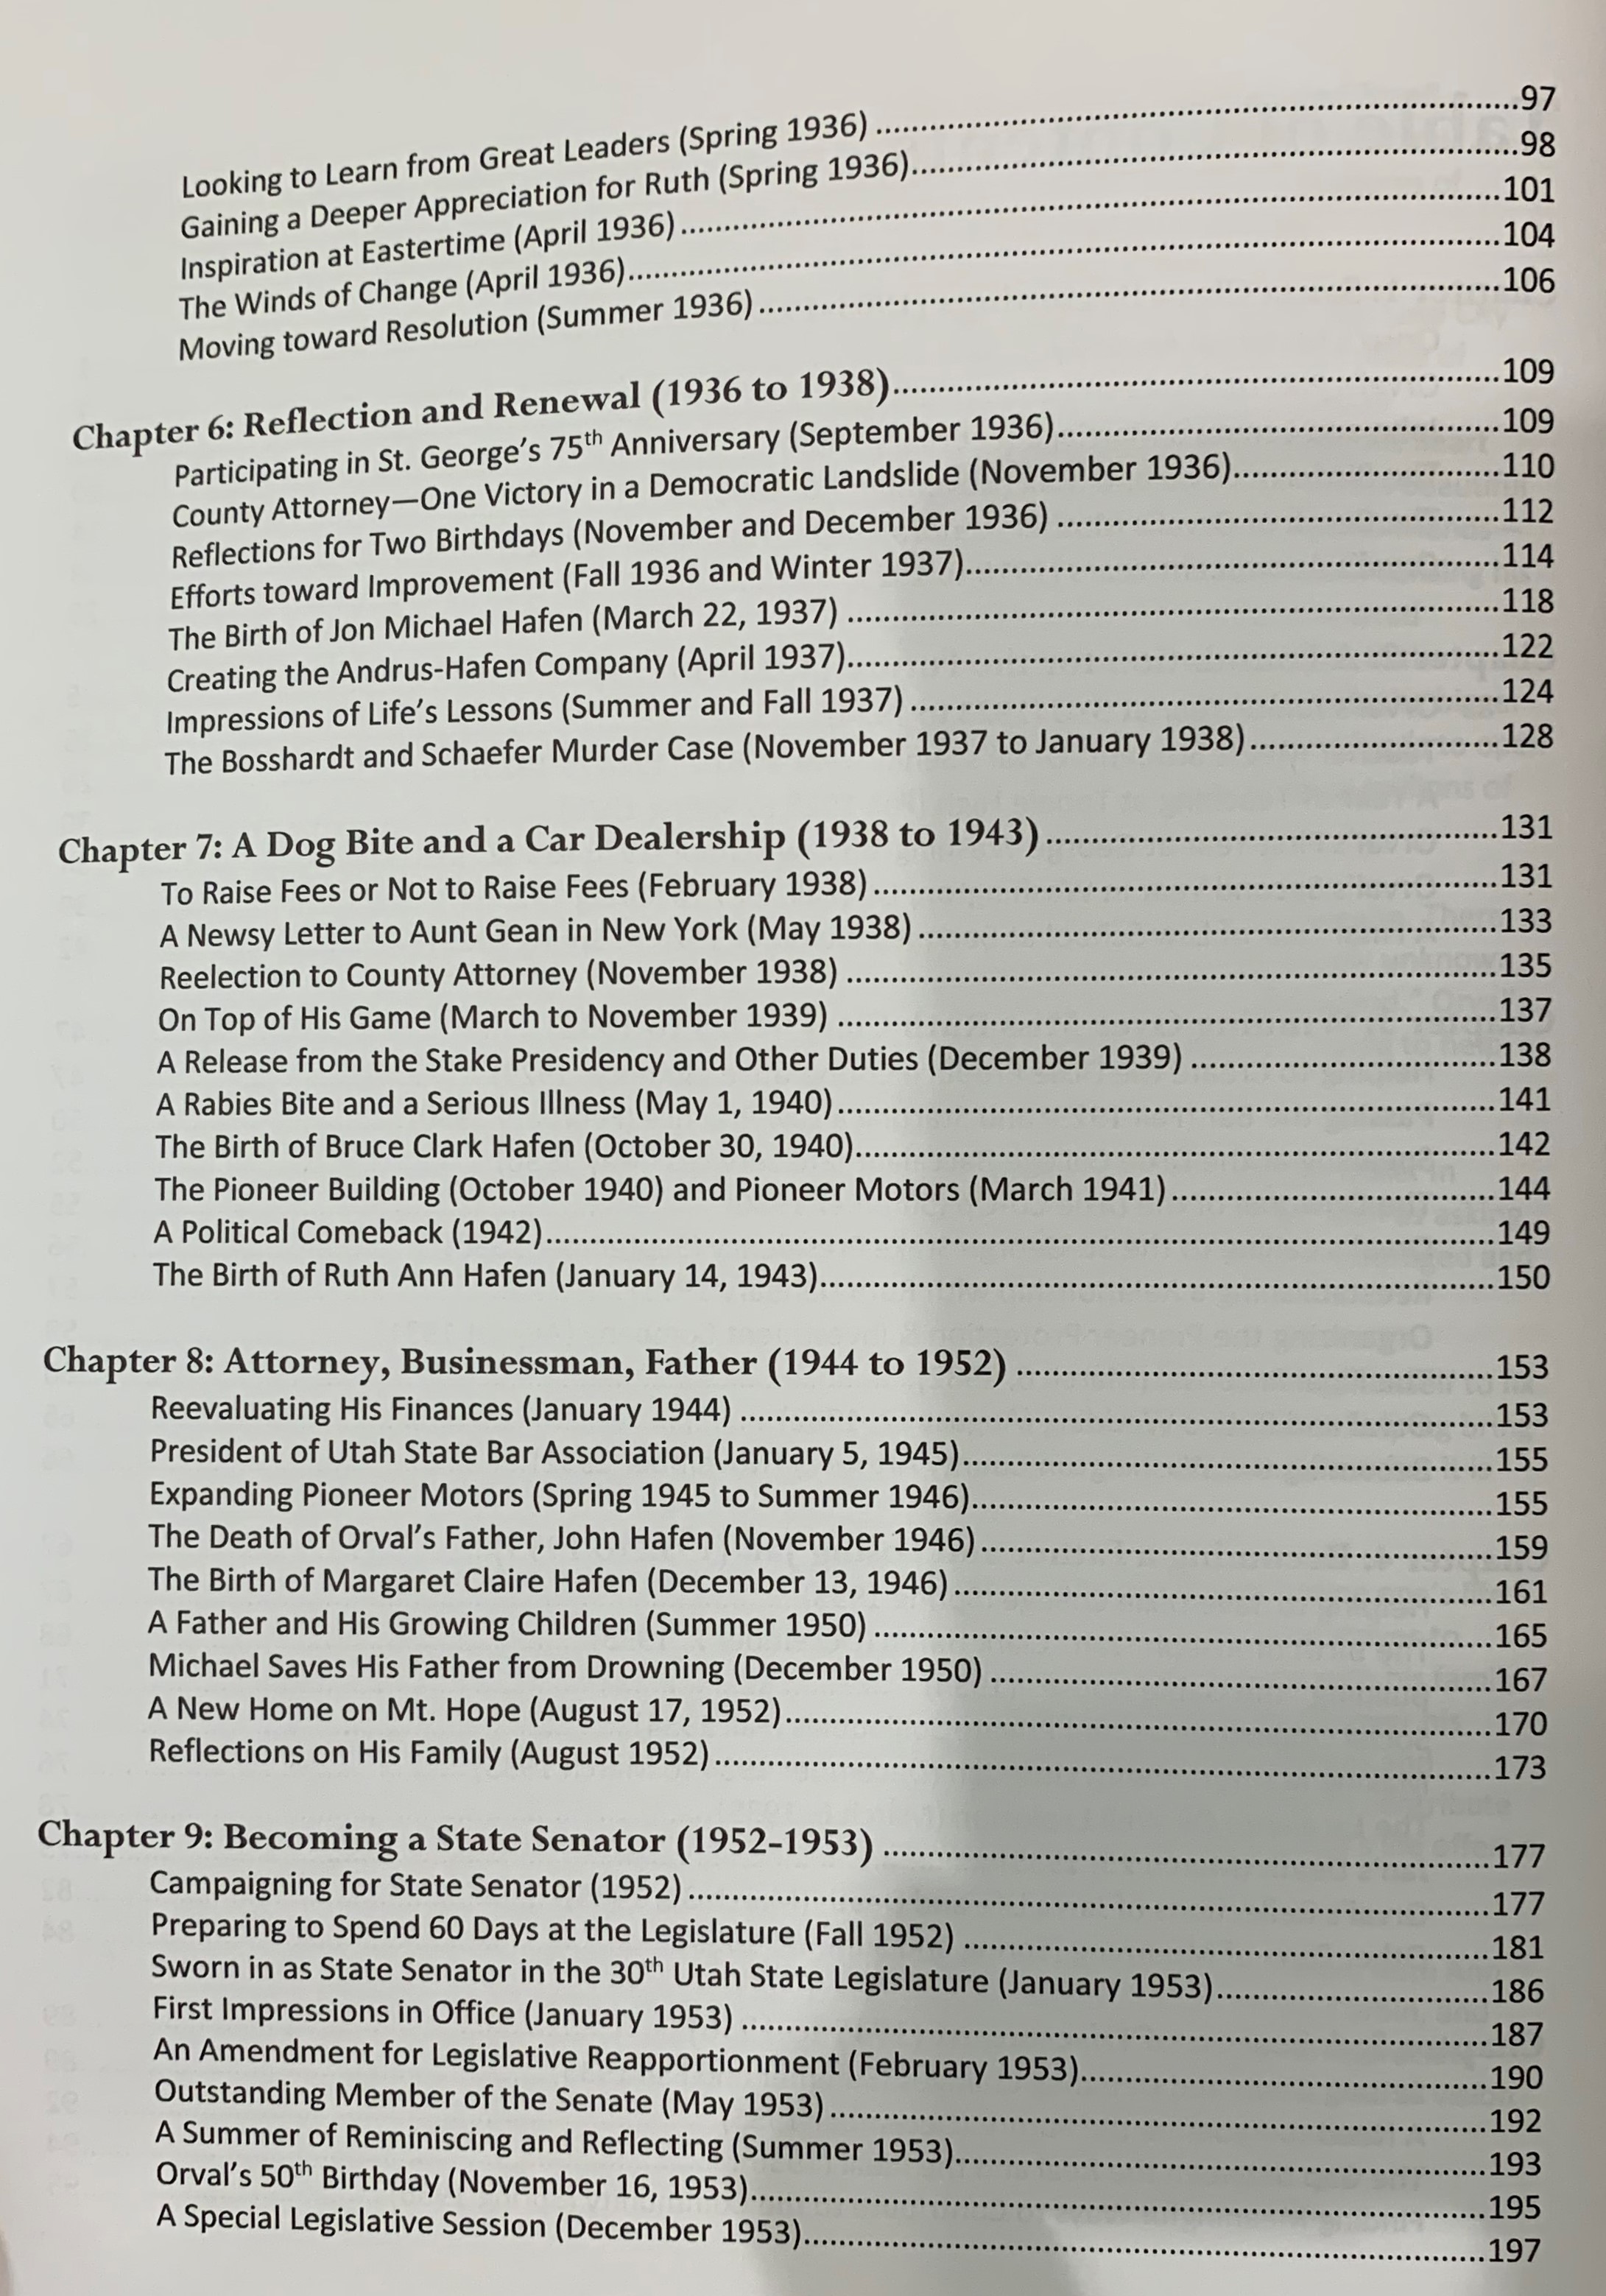 Second page of the table of contents